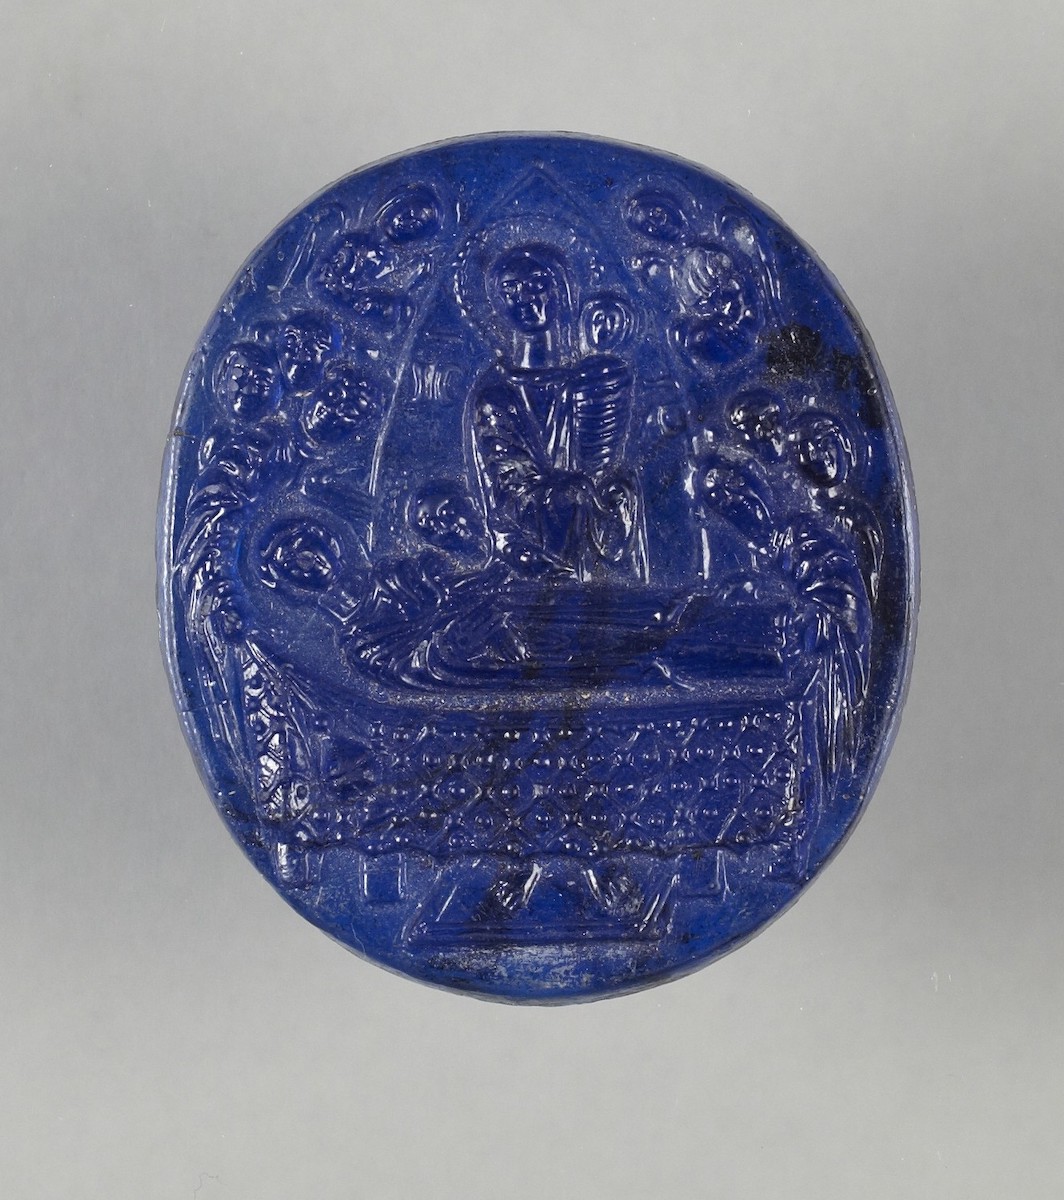 Blue oval cameo carved with man, with halo around his head, inscription in Greek on either side of him, standing in triangular opening, holding swaddled infant behind bed on which is veiled woman, with halo around her head, reclining in profile atop decorated blanket; feet of man visible on platform beneath bed. Above, busts of two angels and on either side heads of seven men, all with the suggestion of haloes around their heads.